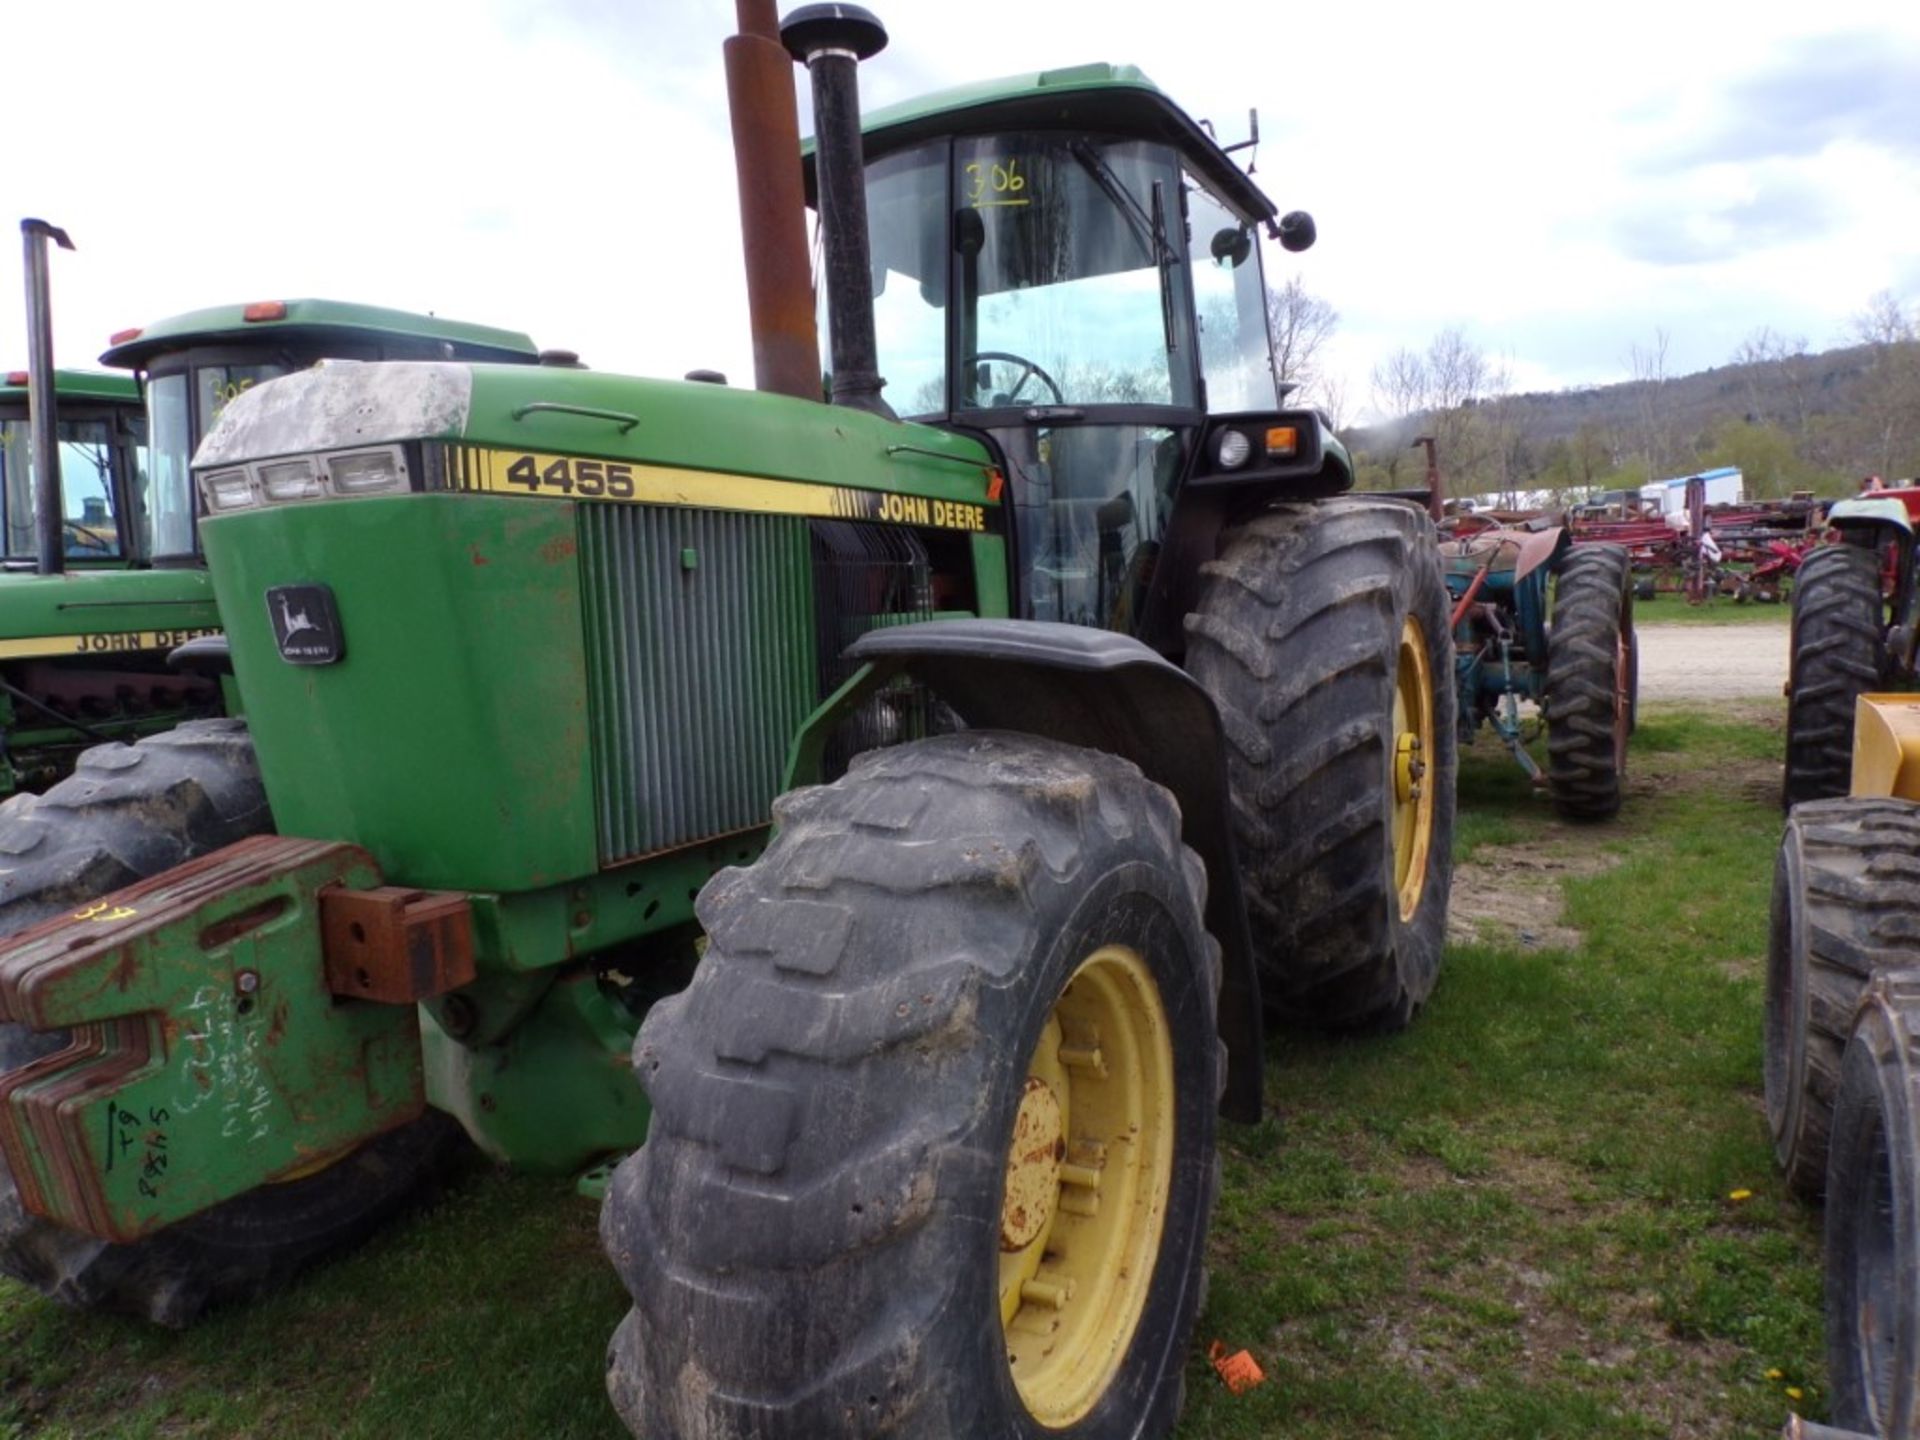 John Deere 4455 4WD Tractor with Power Shift Trans., (3) Rear Hydraulc Remotes, 650-58-38 Rear - Image 3 of 7